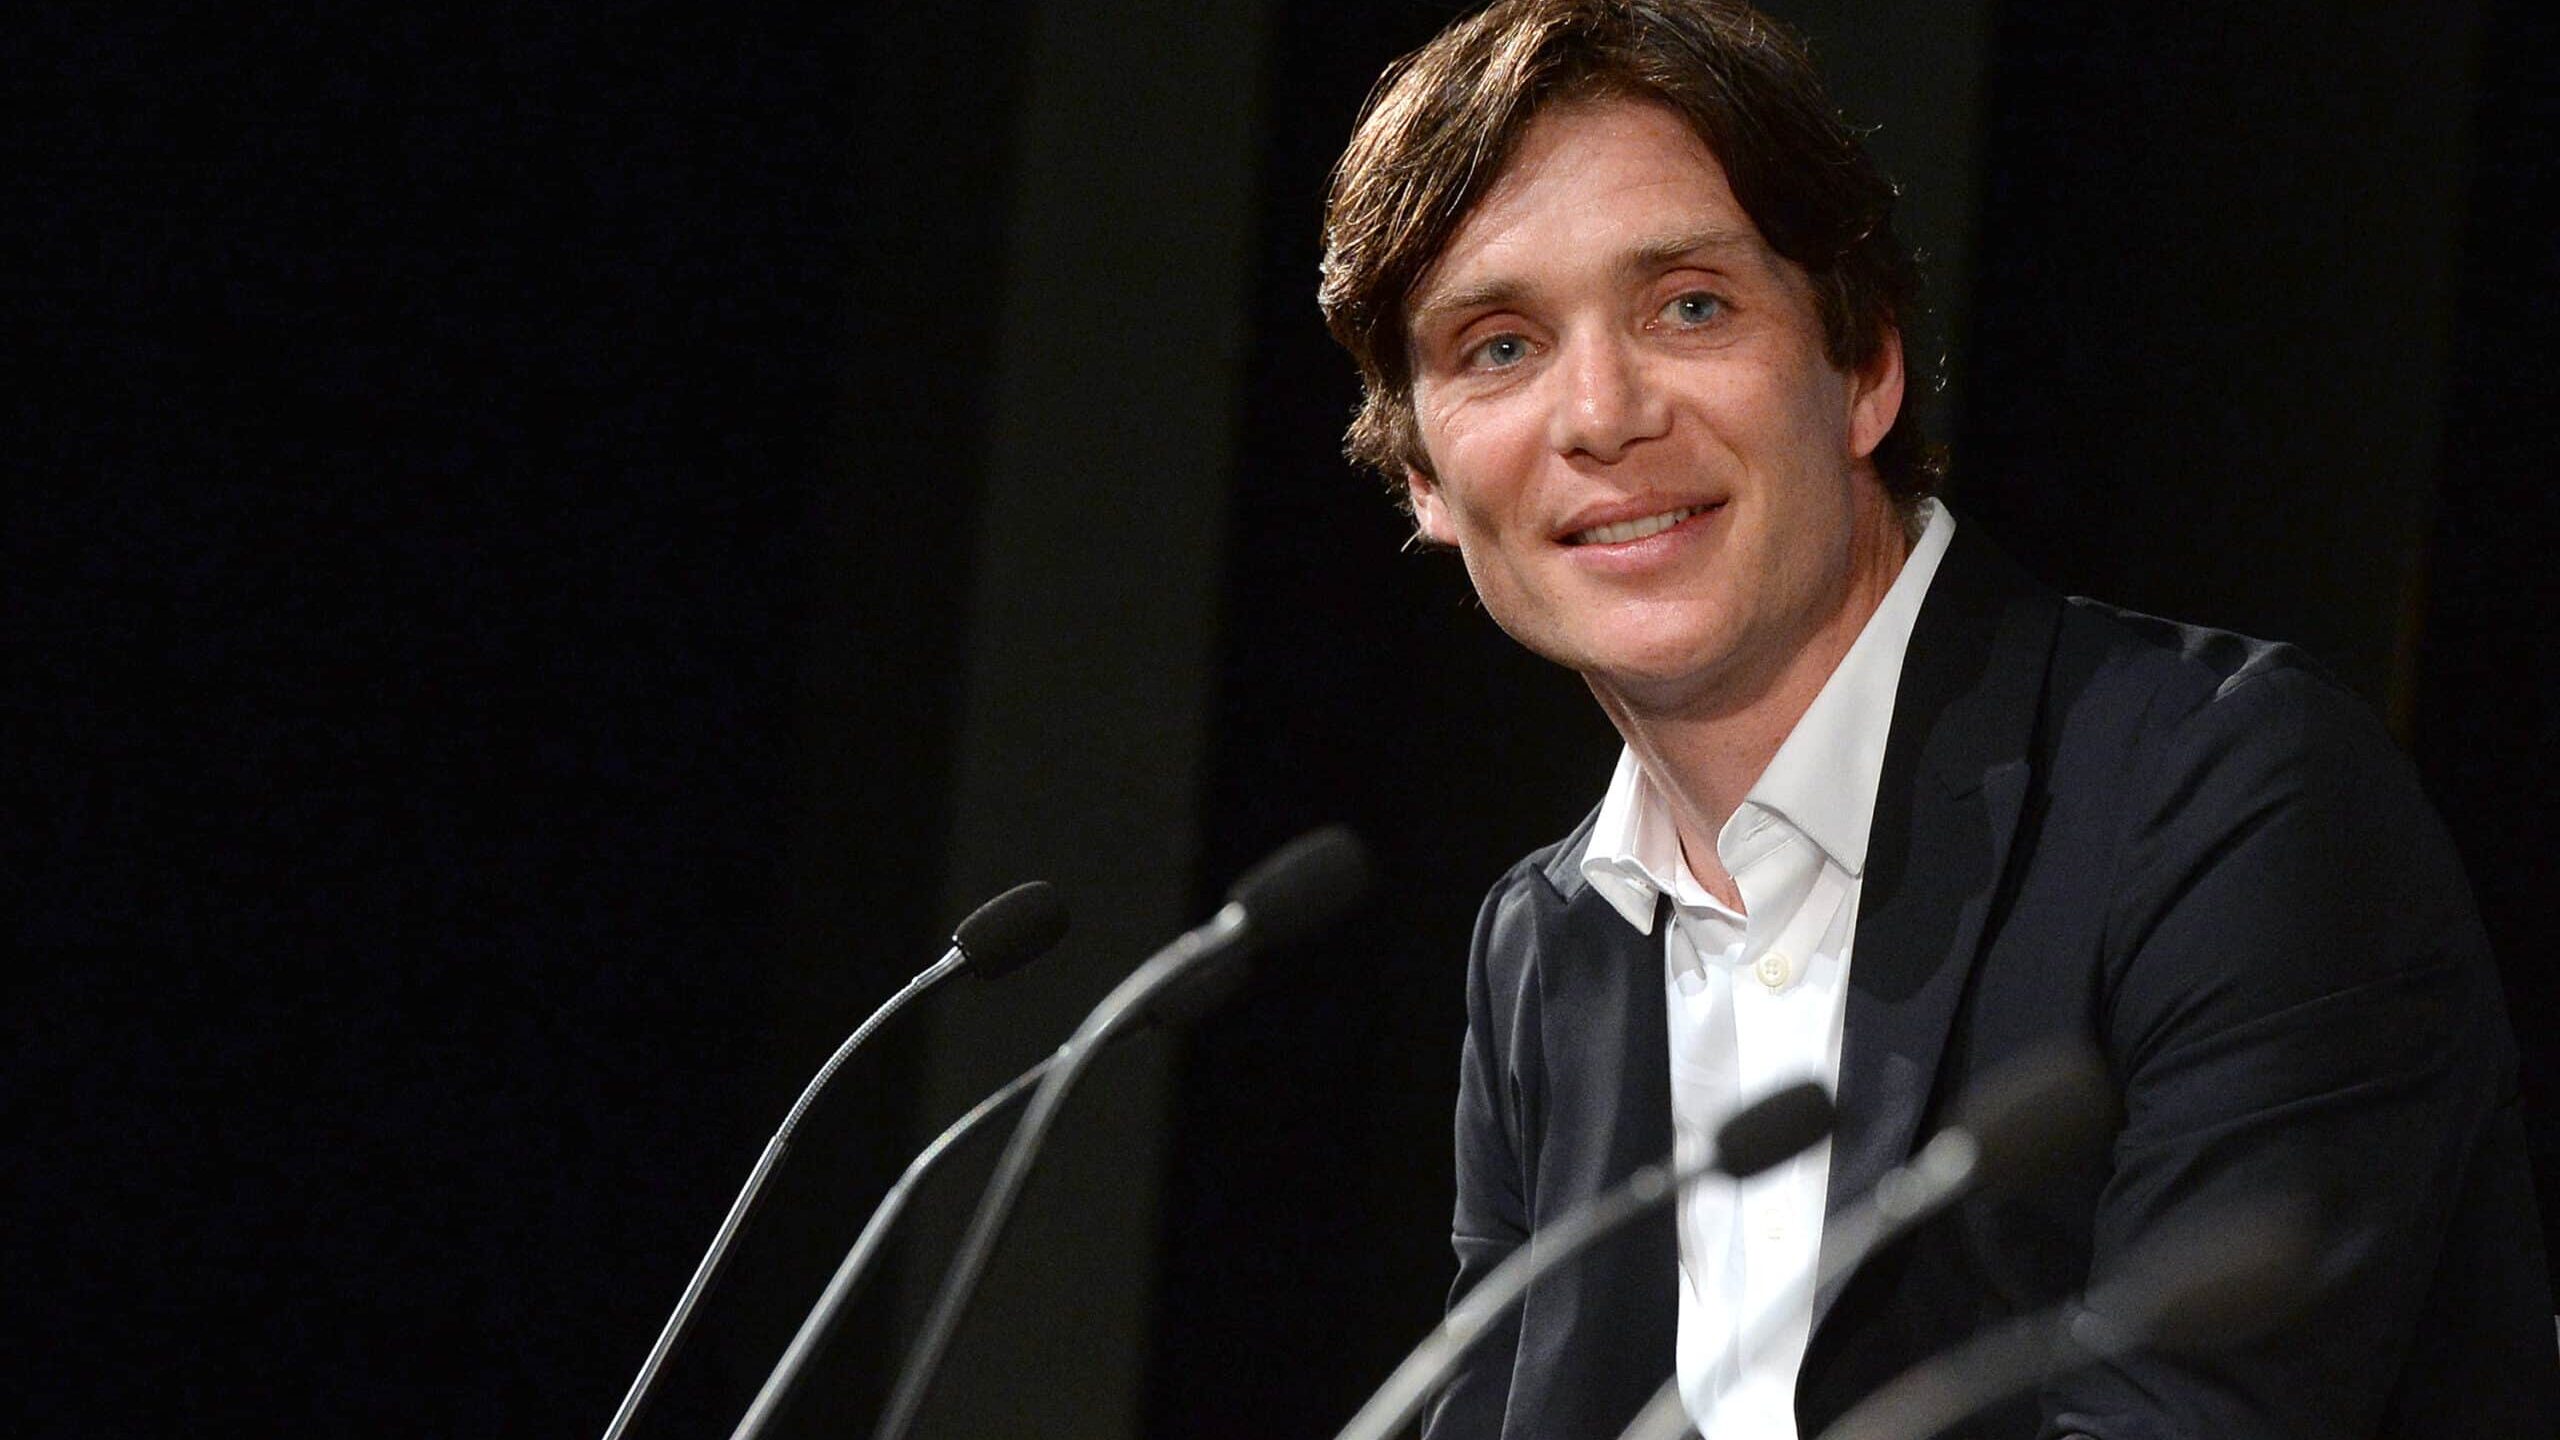 LONDON, ENGLAND - MAY 03: Cillian Murphy during a Q&A at the Premiere of BBC Two's drama "Peaky Blinders" episode one, series three at BFI Southbank on May 3, 2016 in London, England.